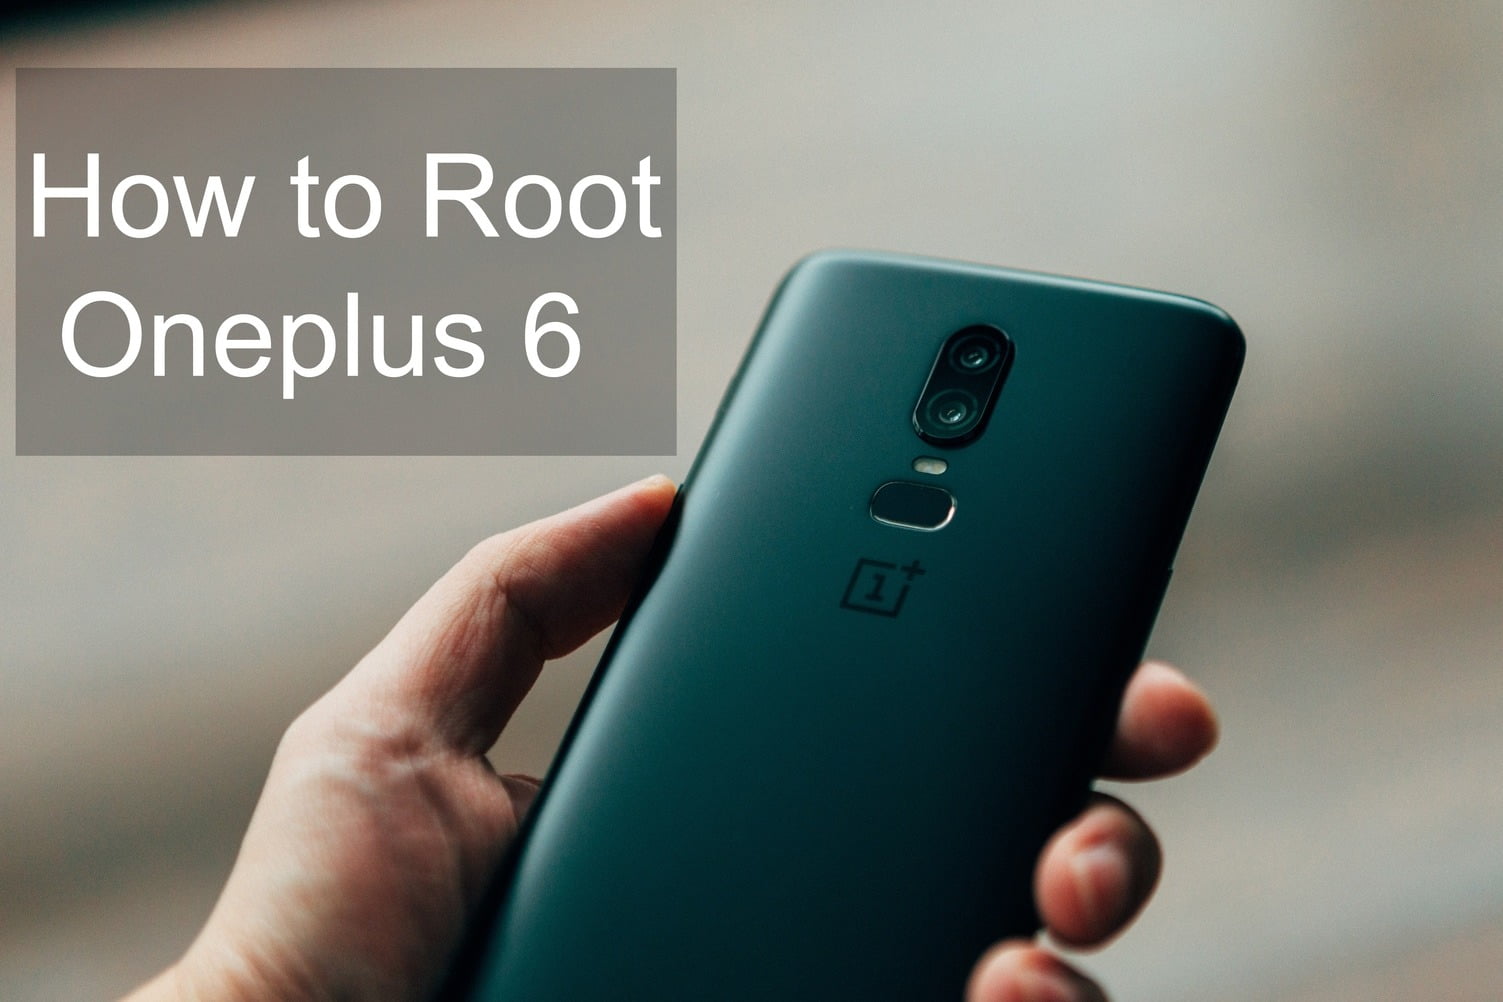 How to root oneplus 6